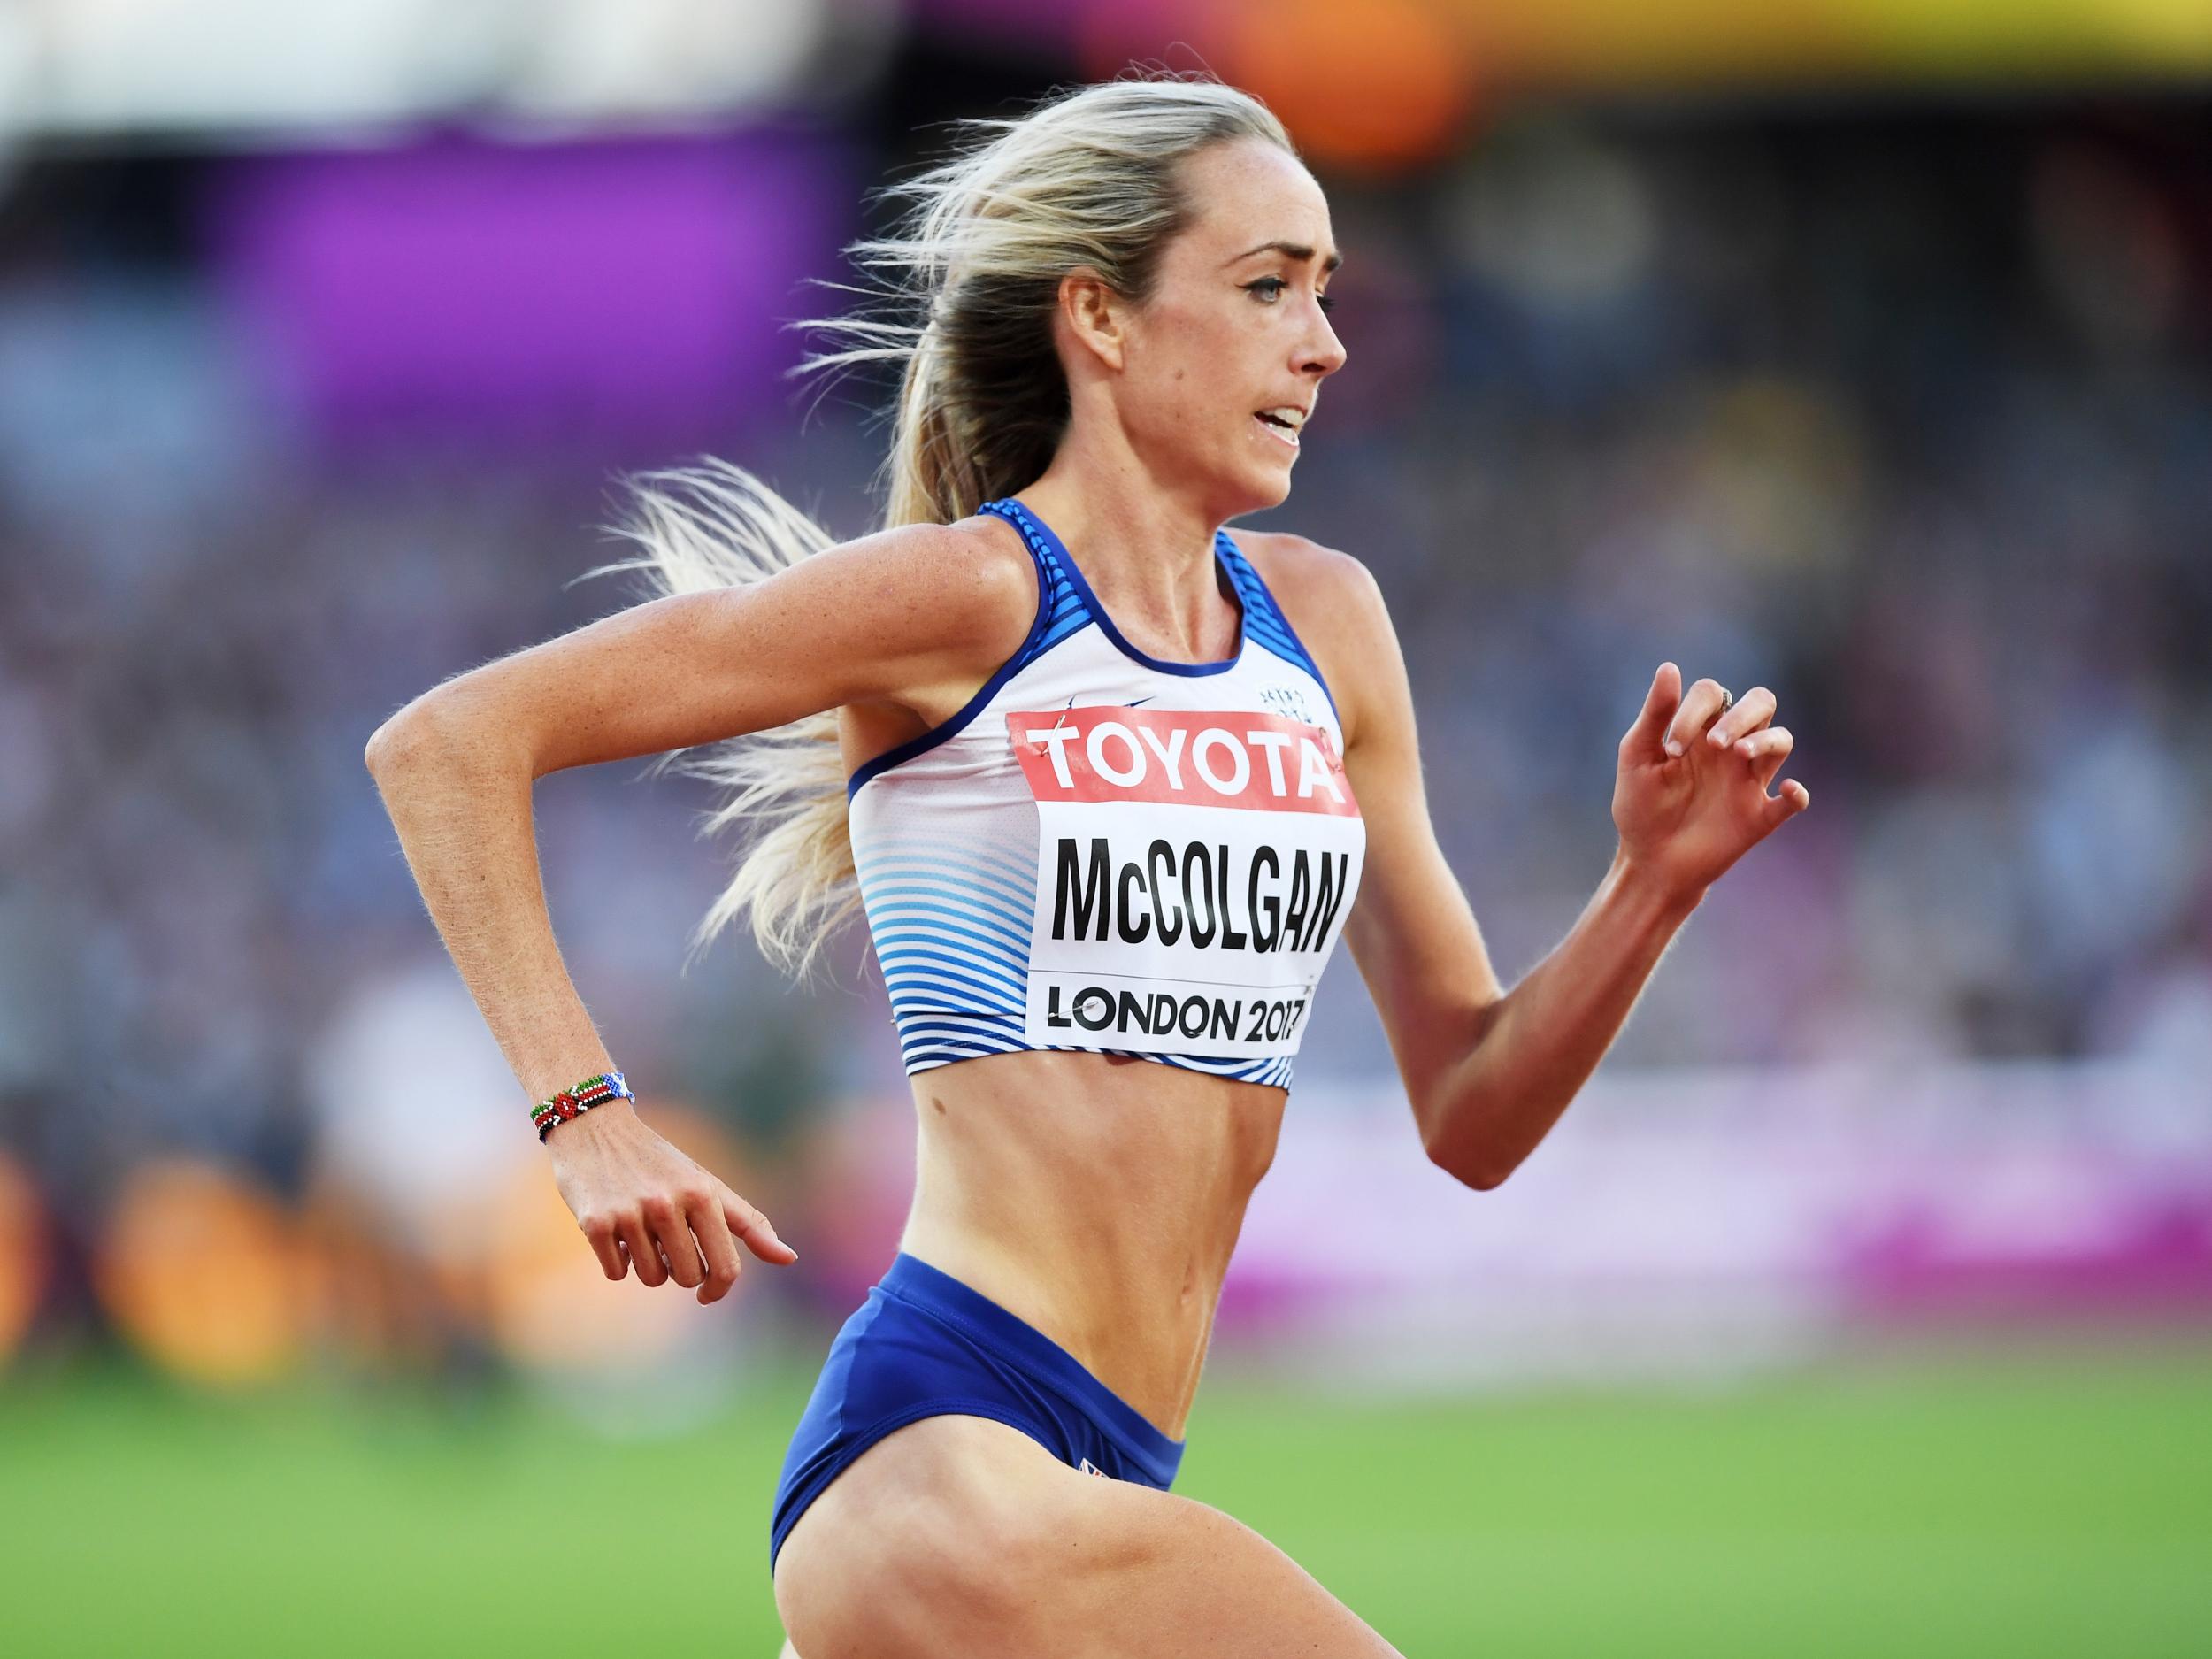 McColgan also made it into the 5,000m metres final